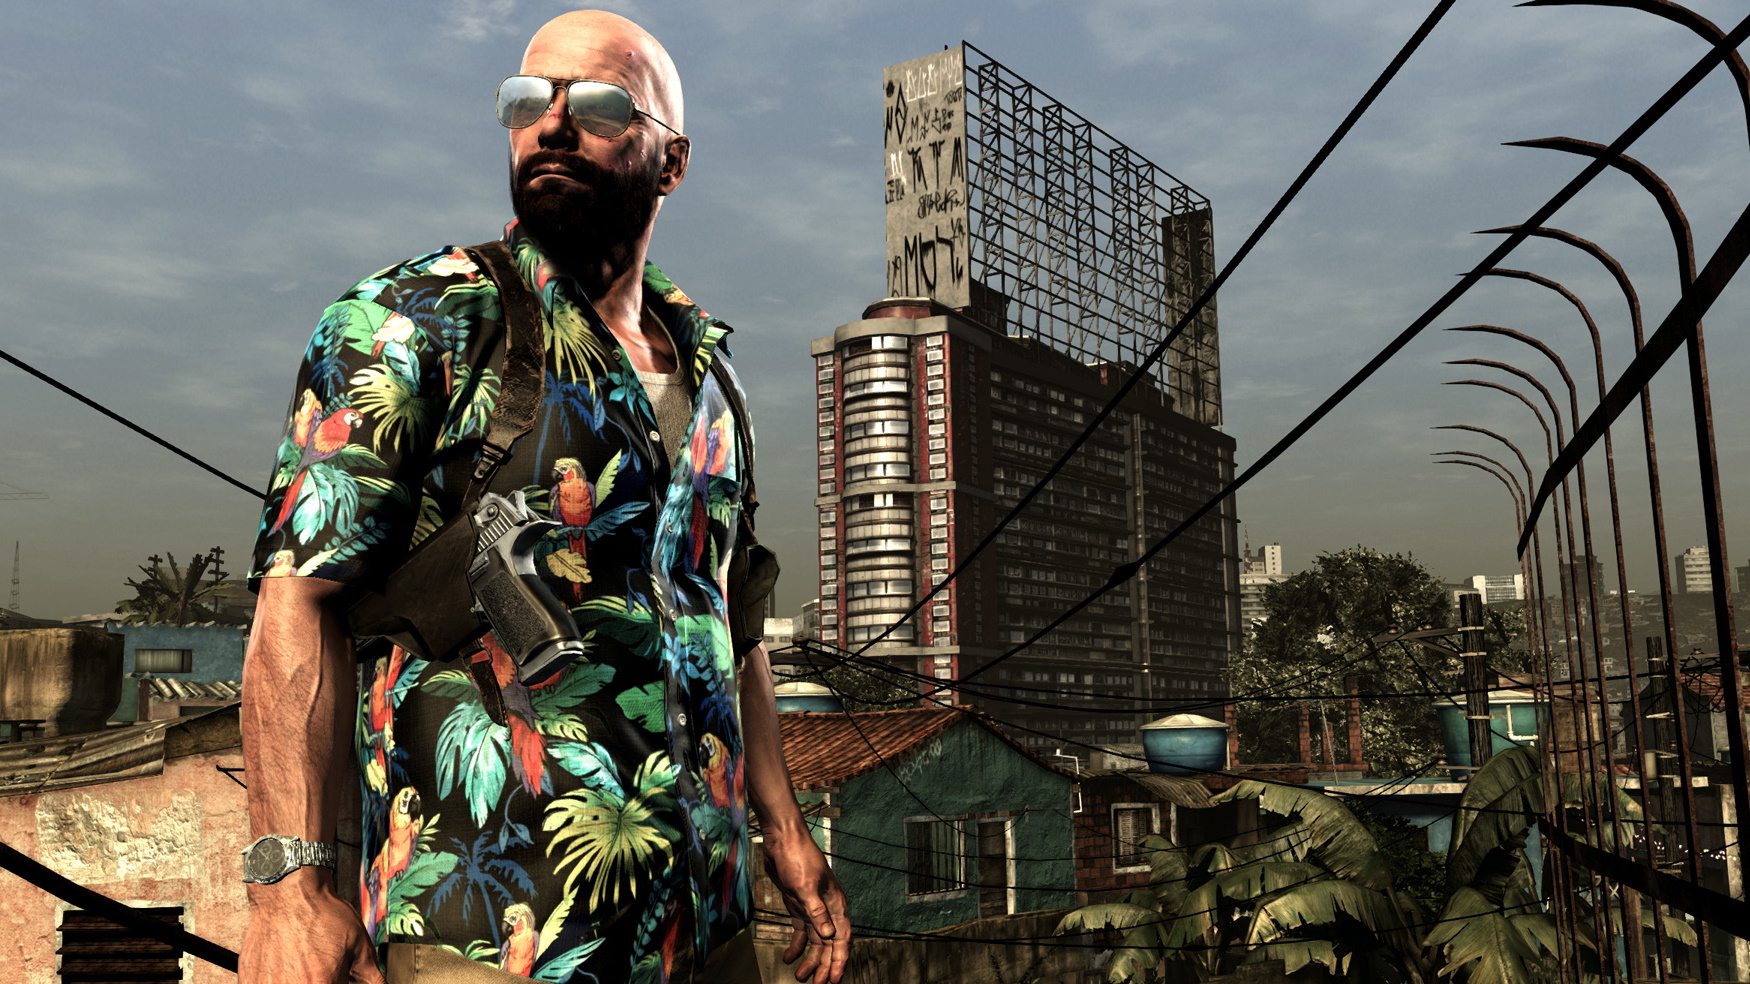 Max Payne 3' final DLC given date